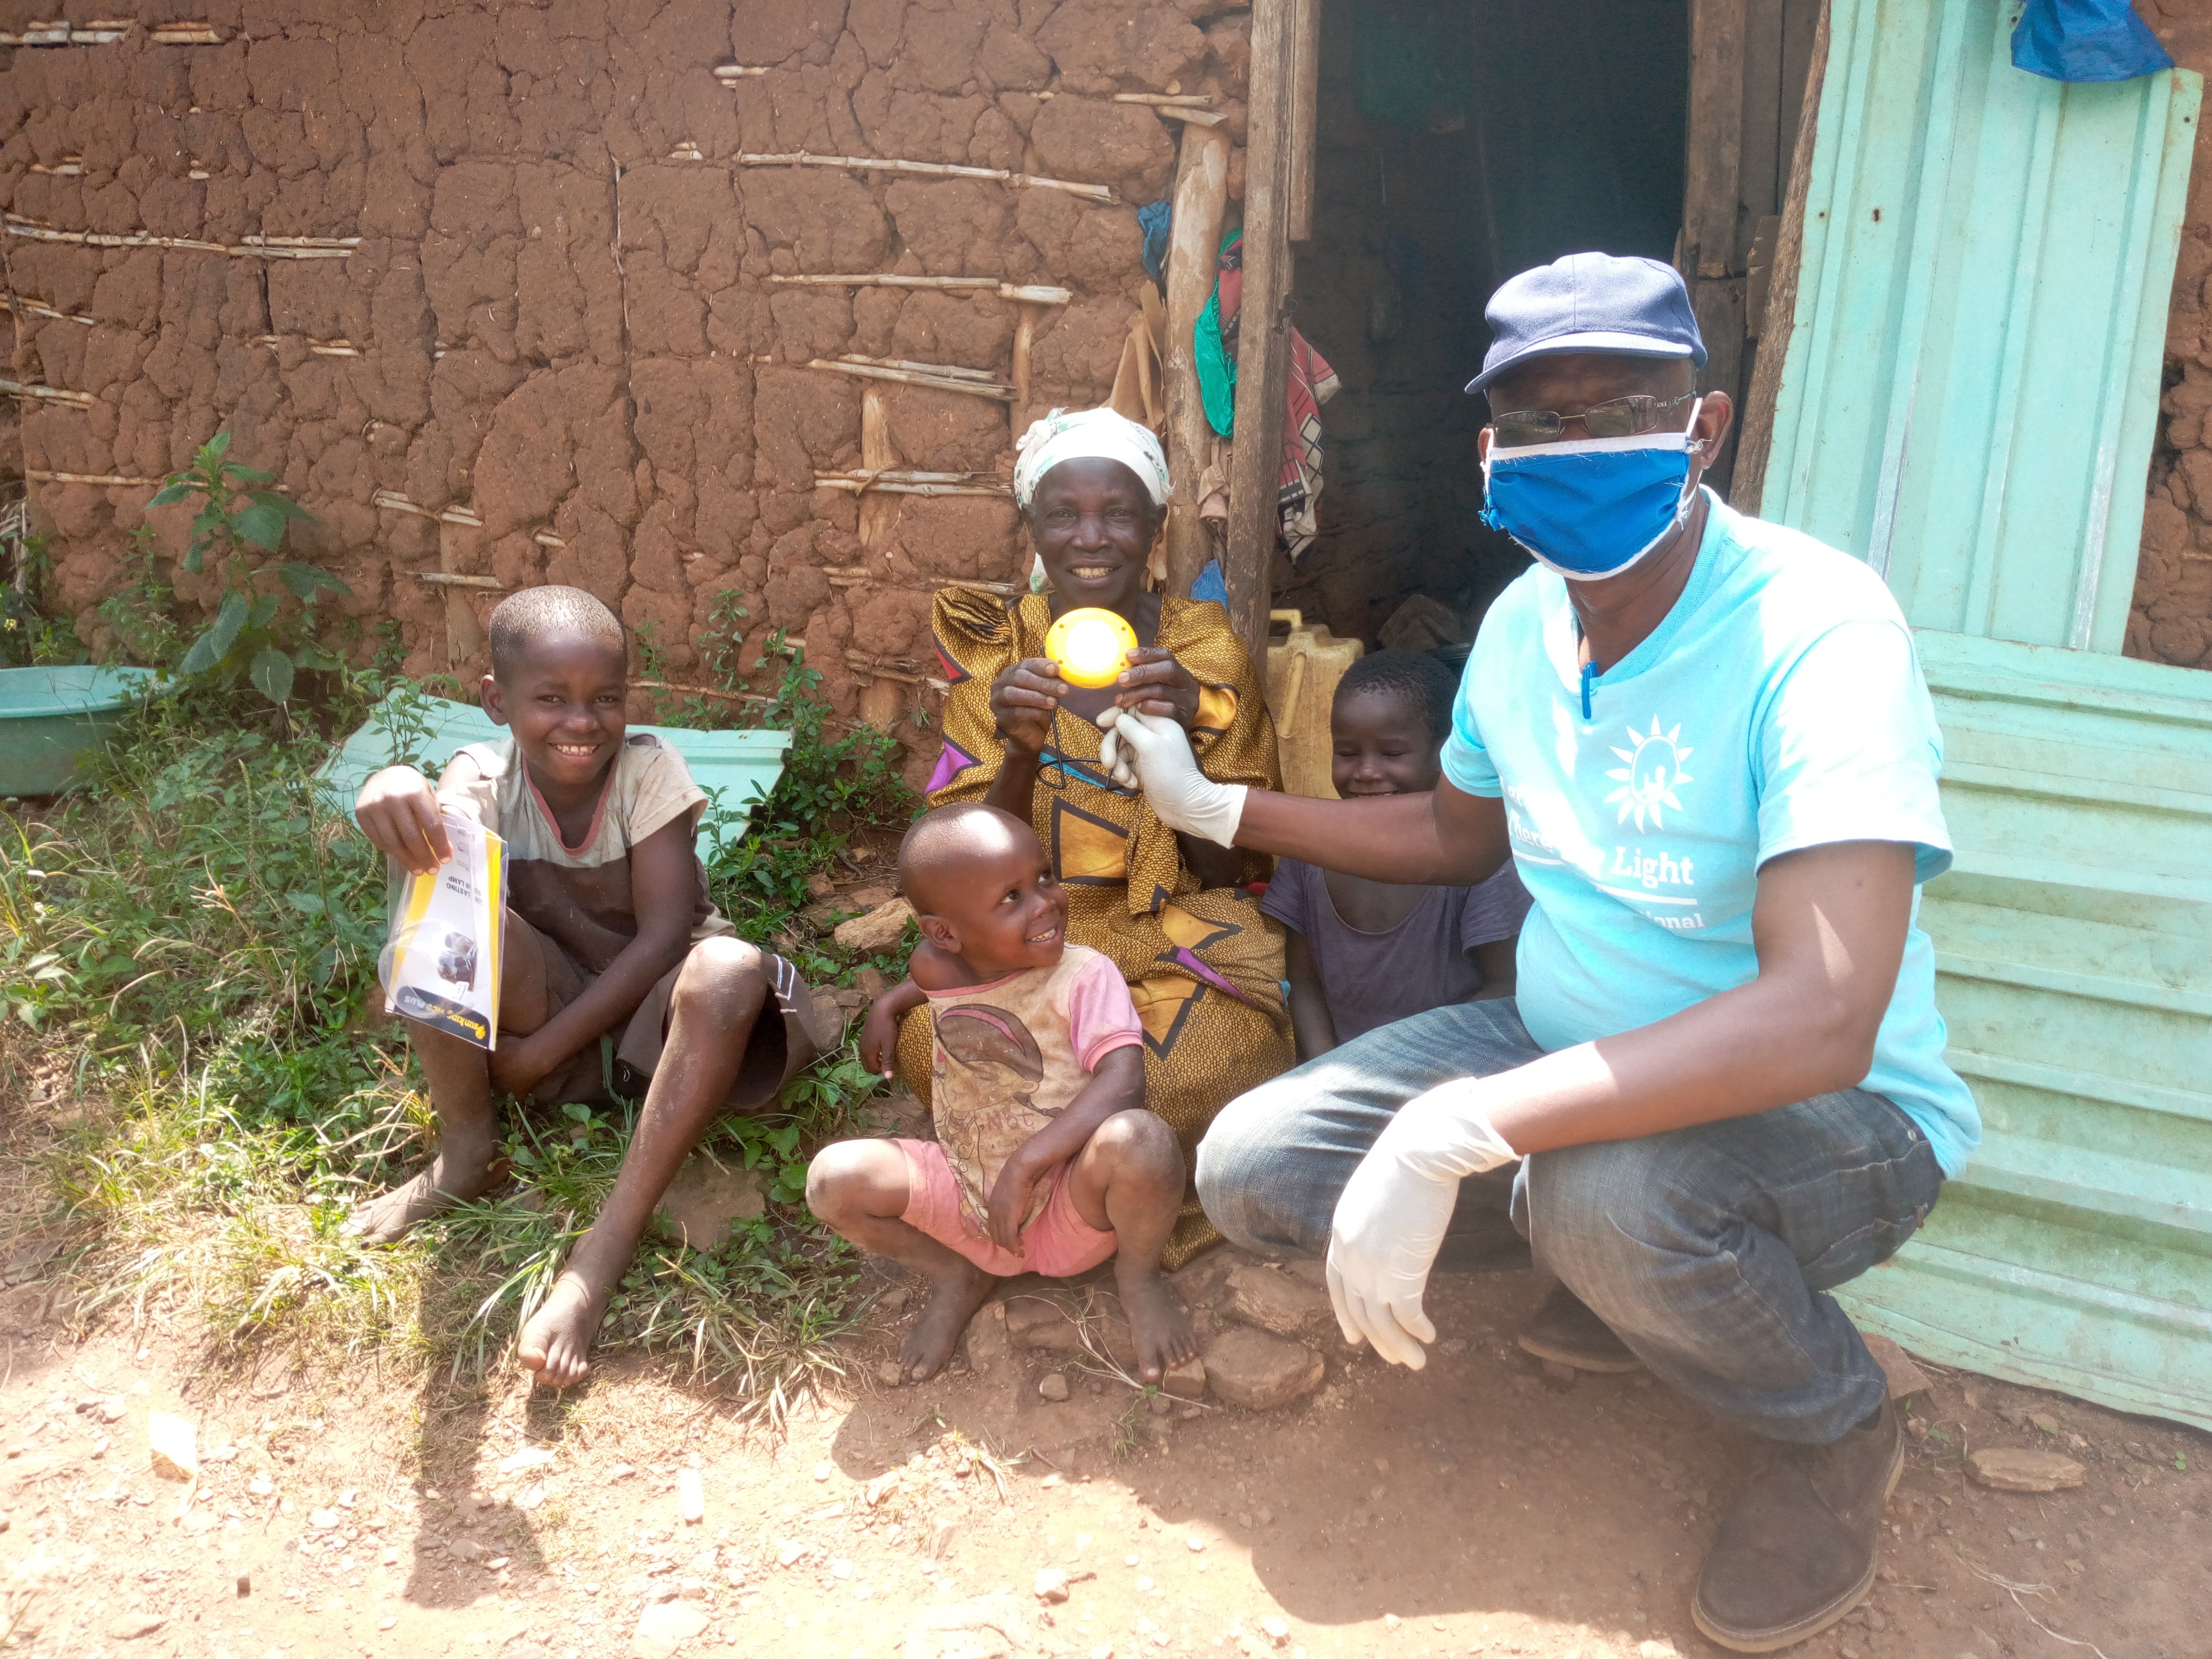 CESA-Uganda gives out solar lights to help families in lockdown.